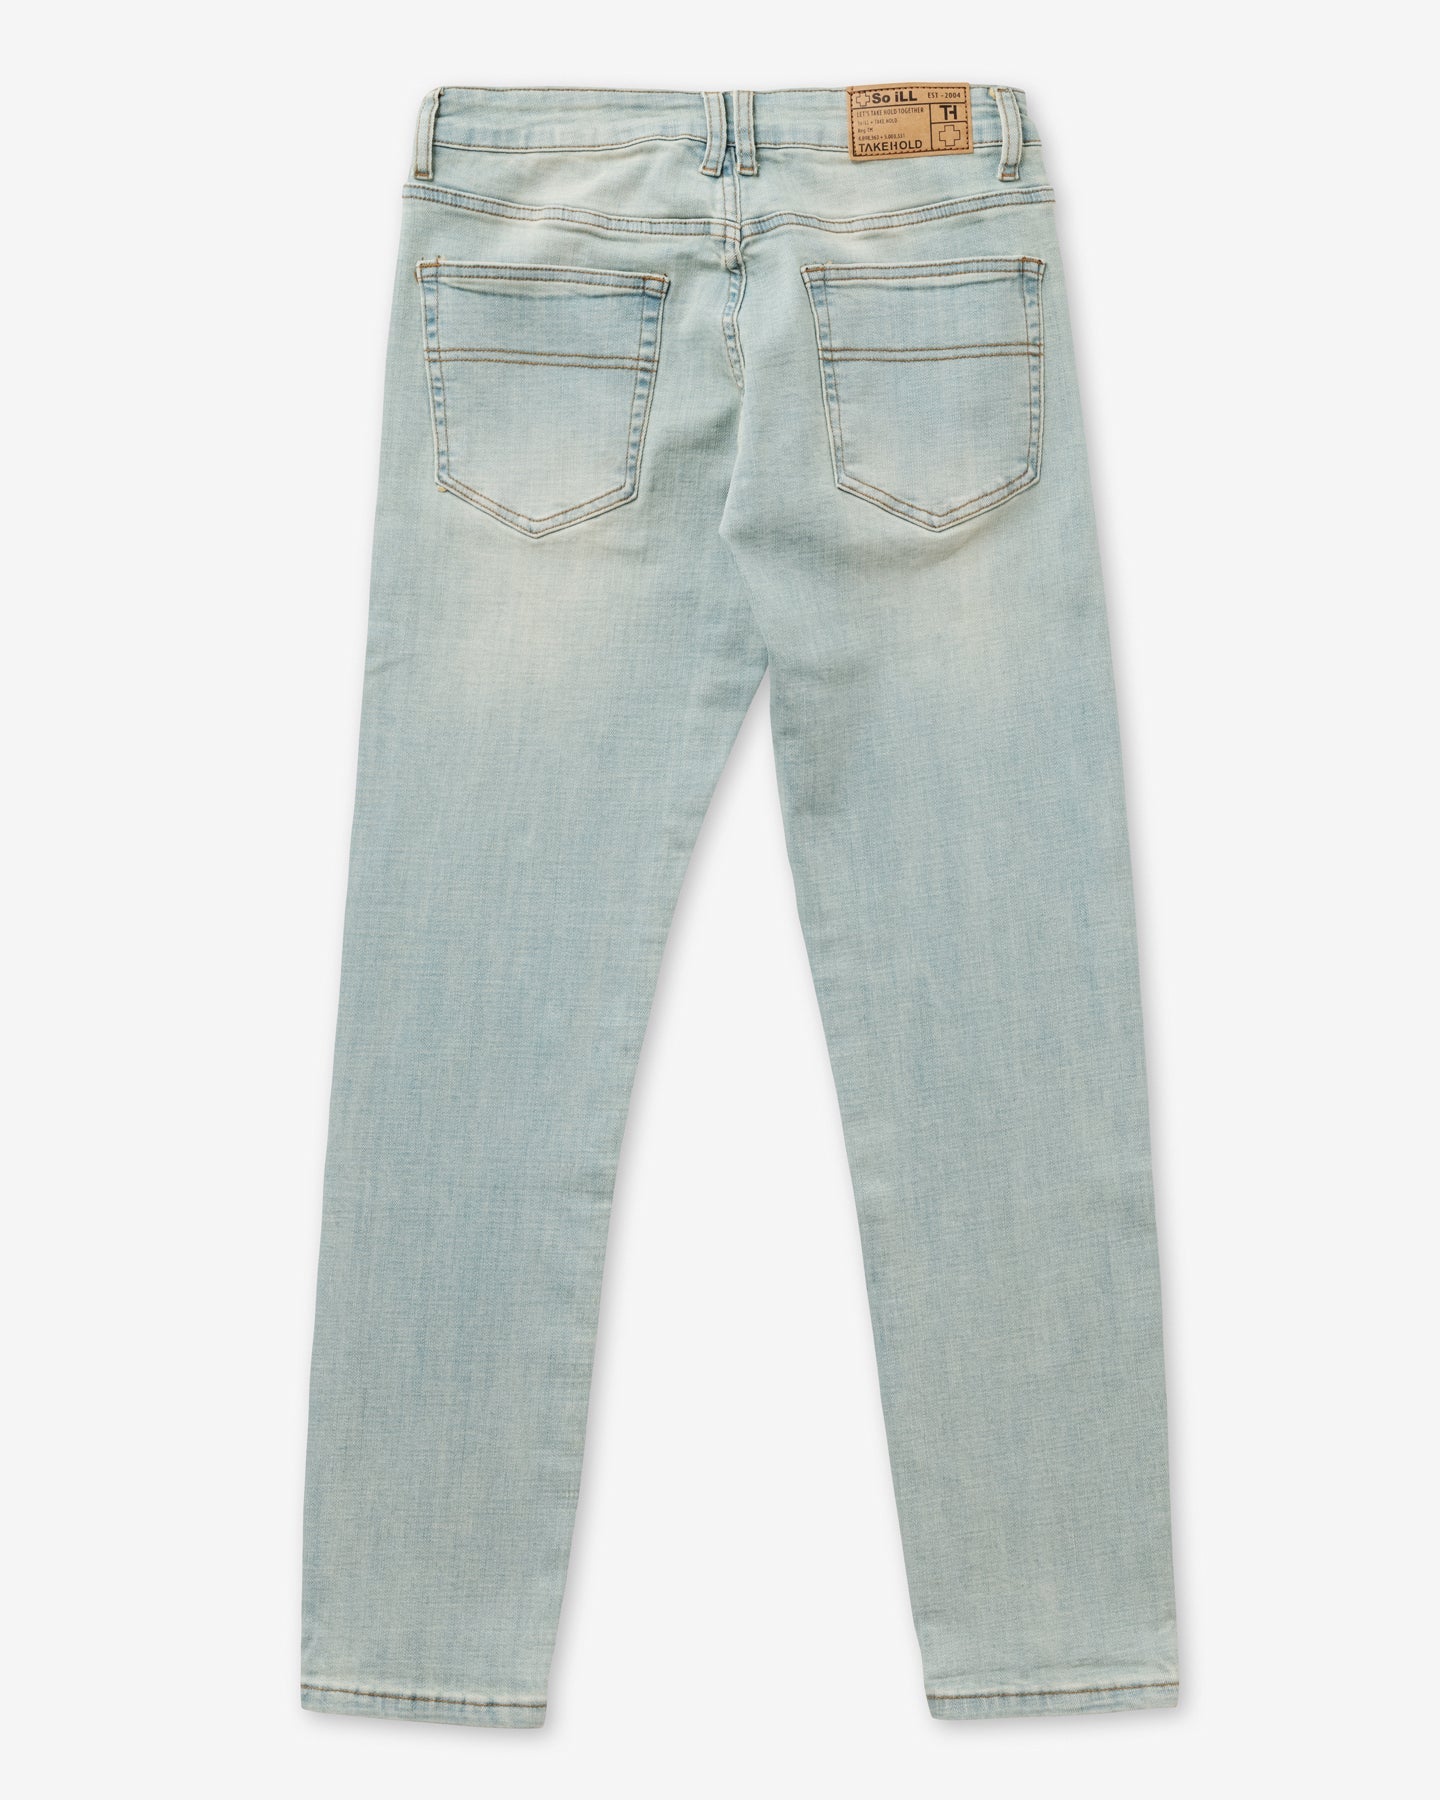 Why Almost Every Pair of Jeans Has a Zipper That Says YKK